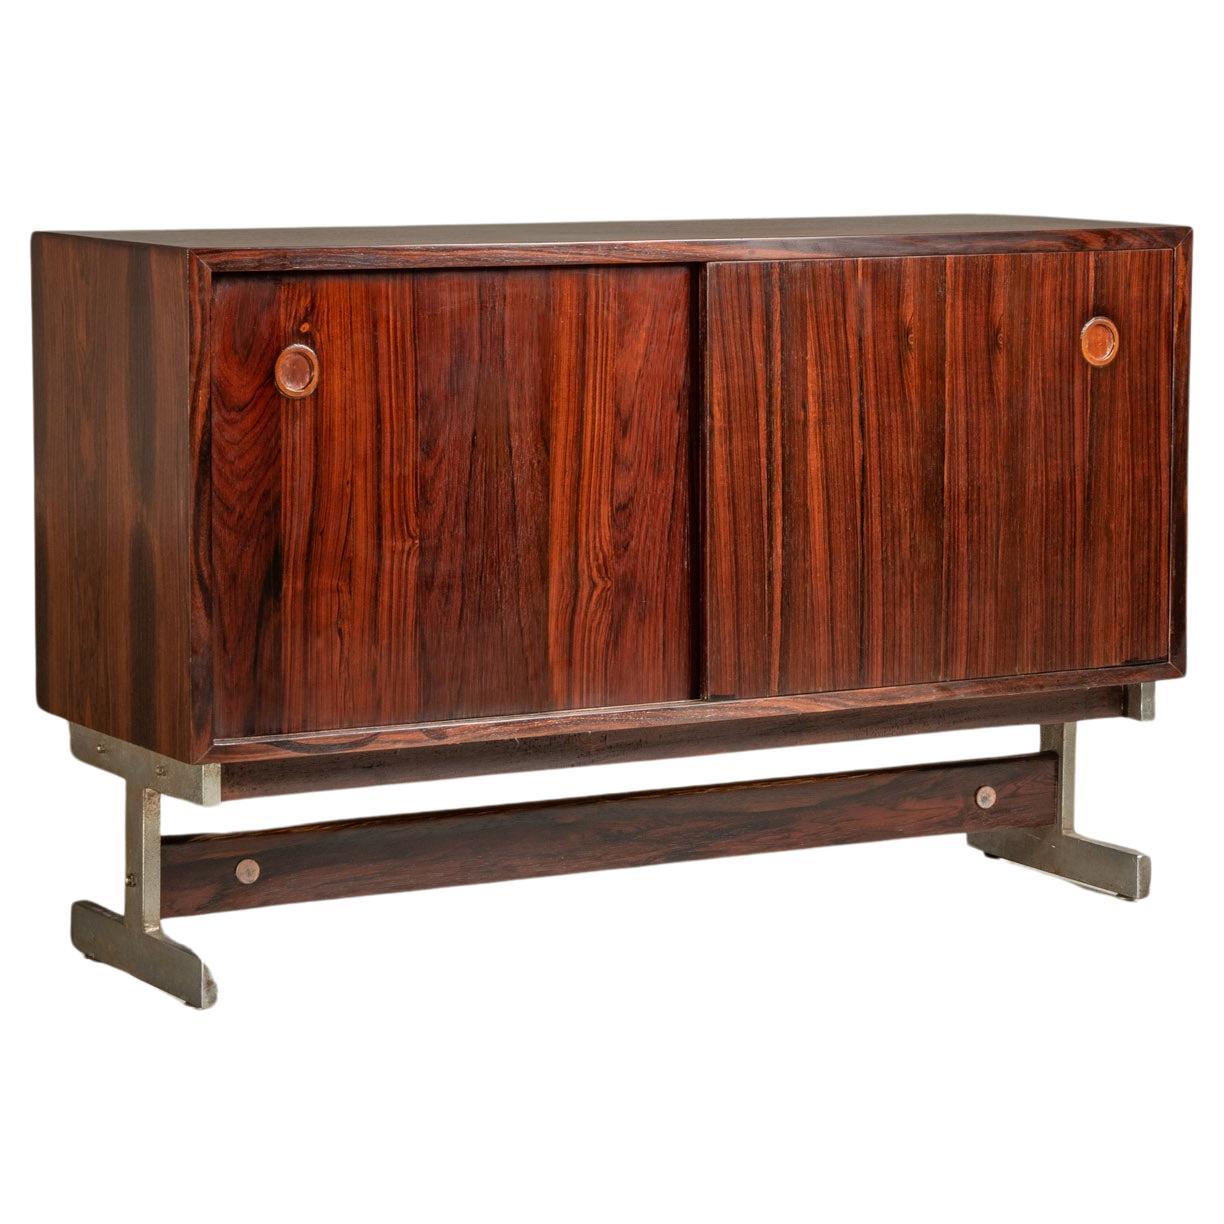 Small Sideboard in Hardwood, by Sergio Rodrigues, Brazilian Mid-Century Modern